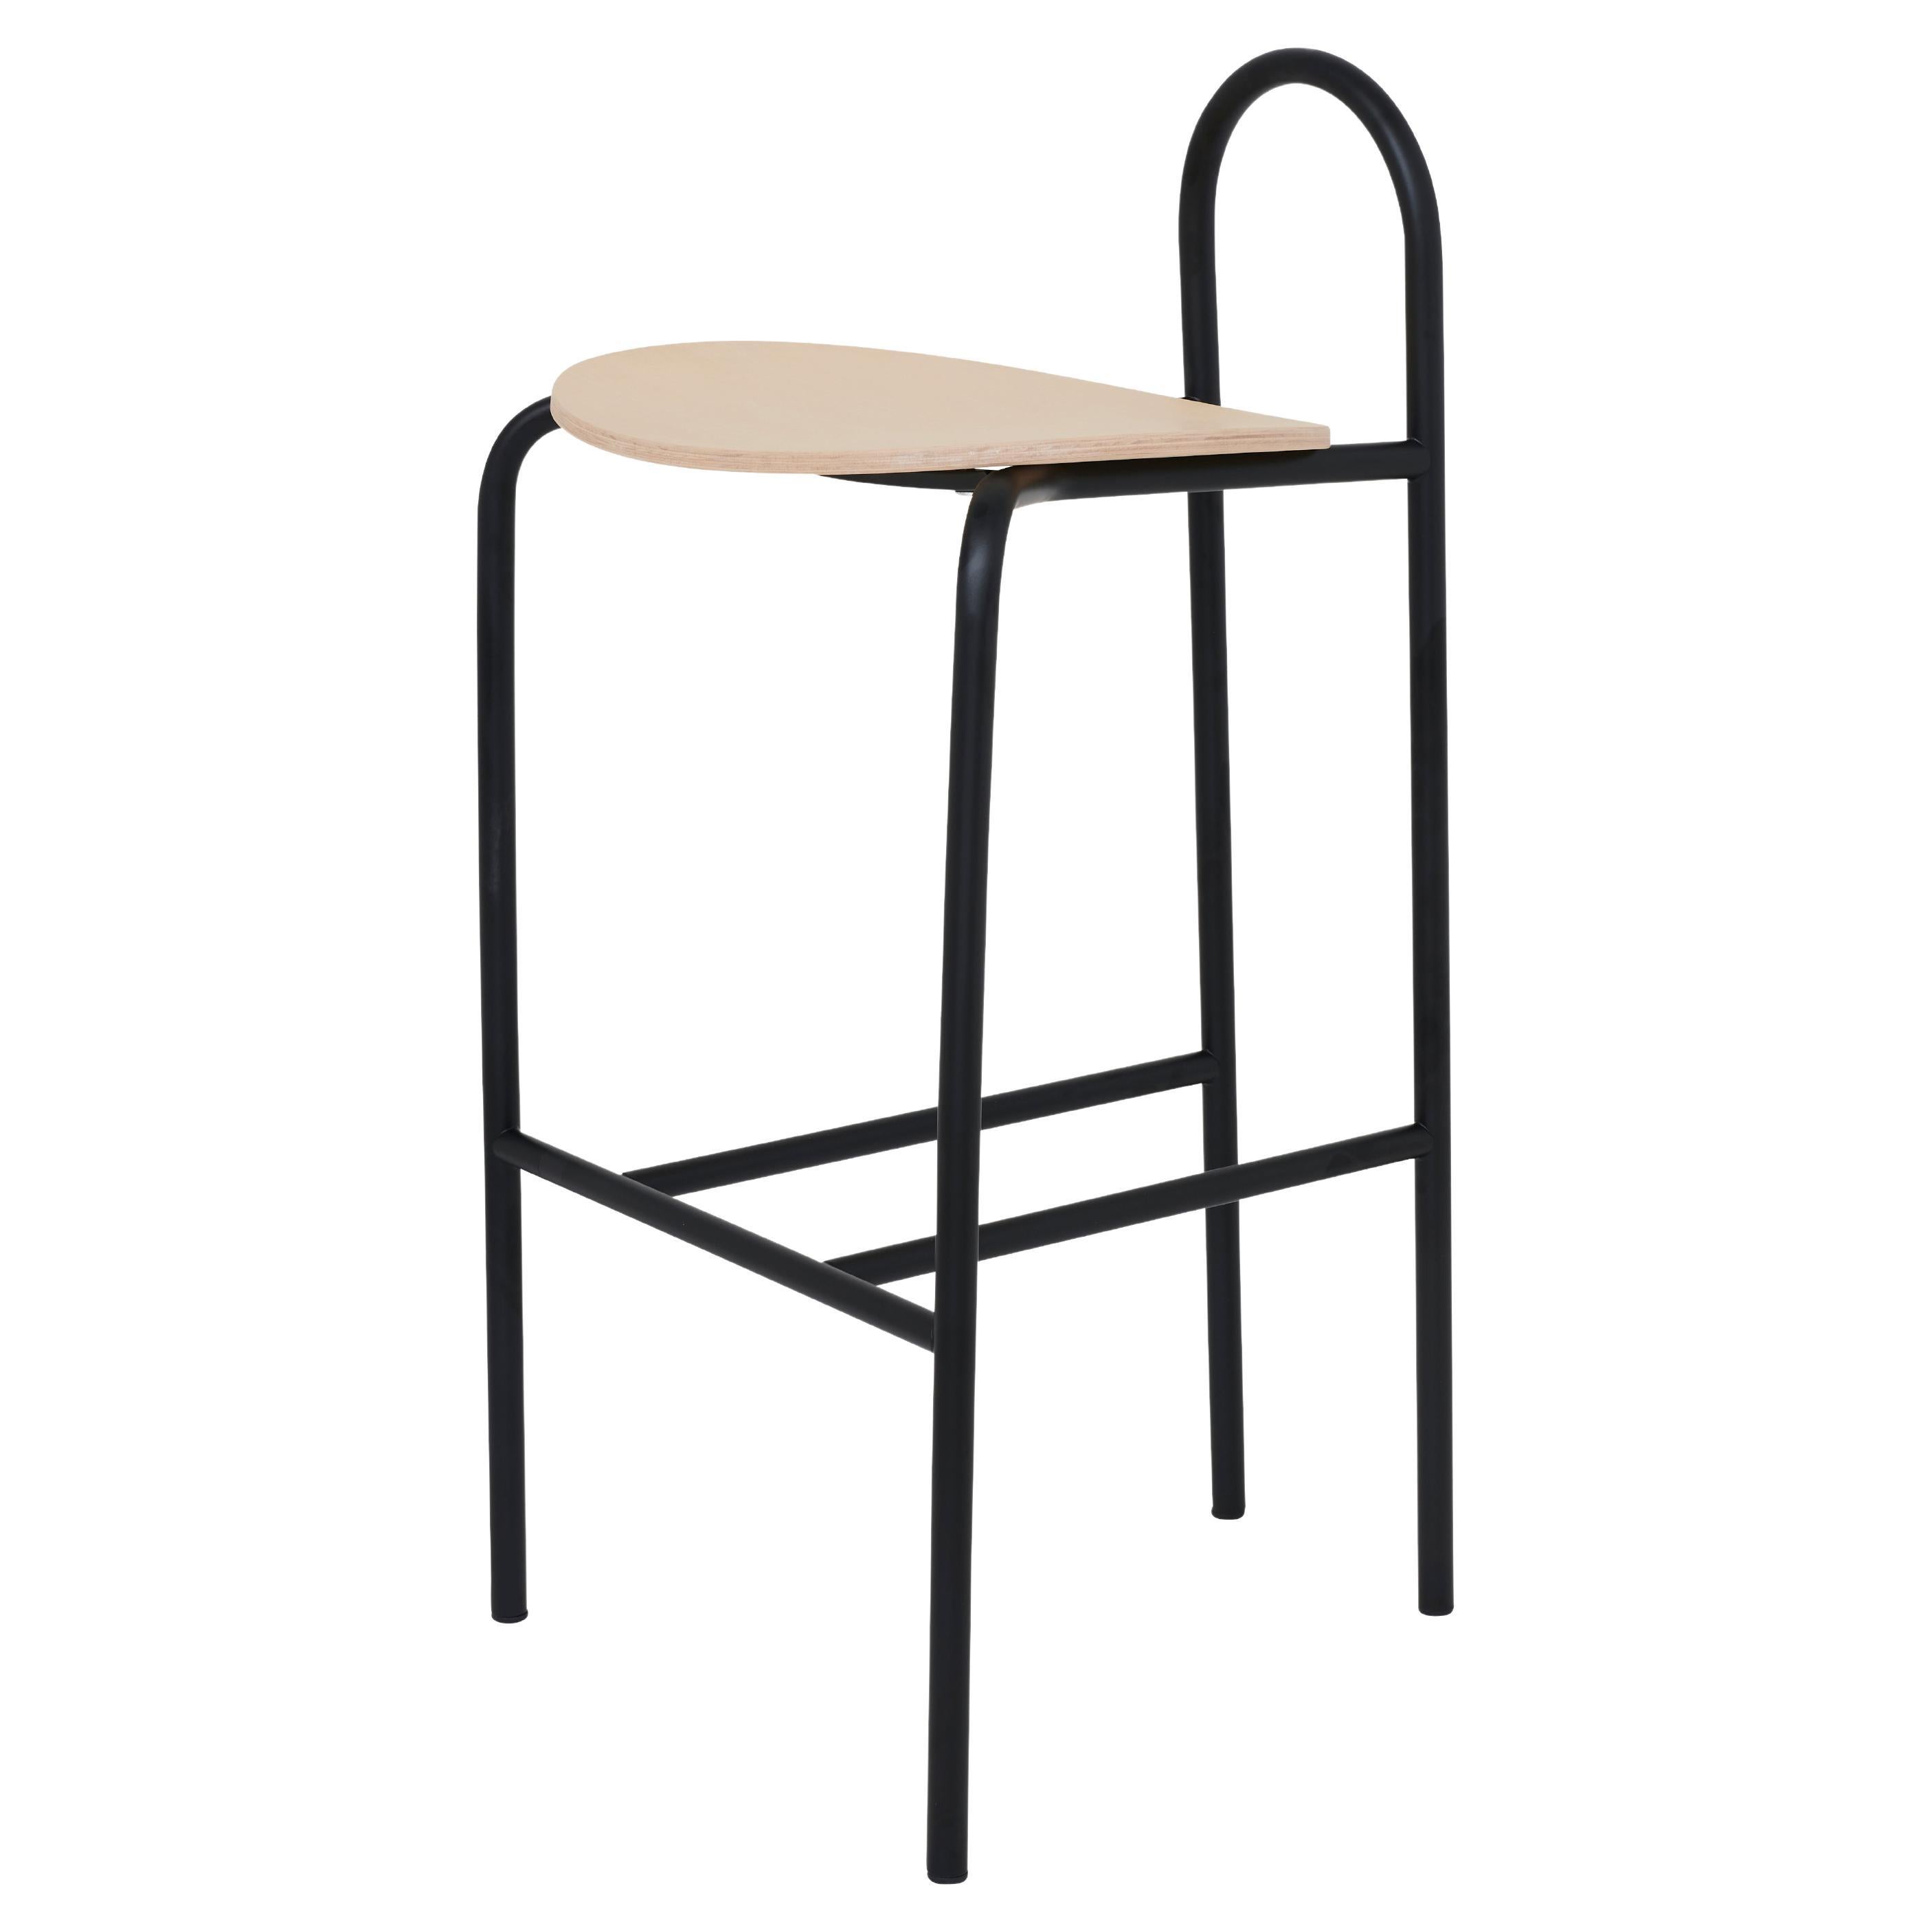 SP01 Michelle High Bar Stool in Natural Ash, Made in Italy For Sale